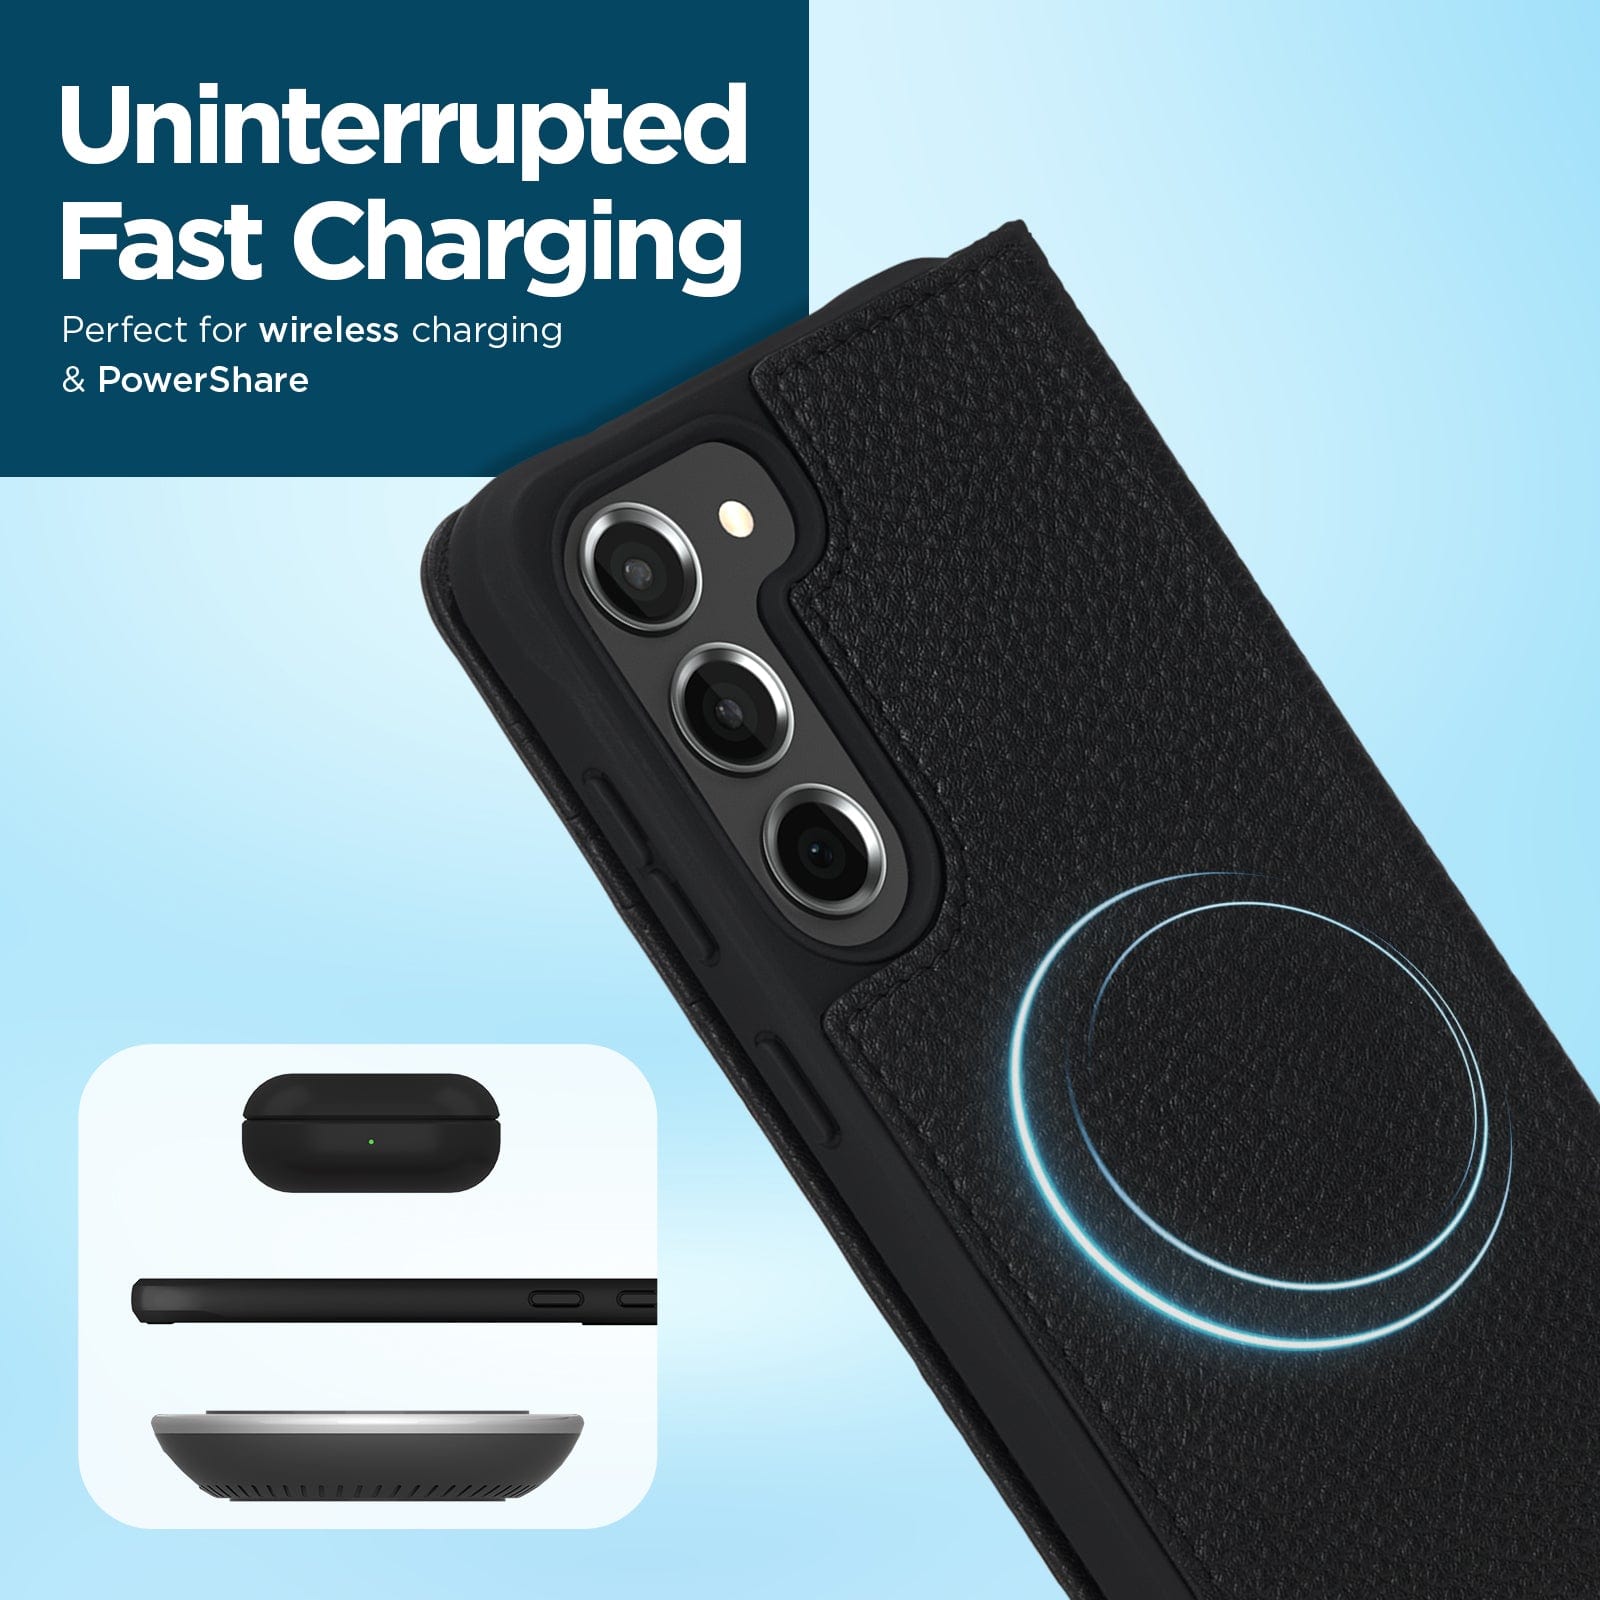 UNINTERRUPTED FAST CHARGING PERFECT FOR WIRELESS CHARGING & POWERSHARE. 